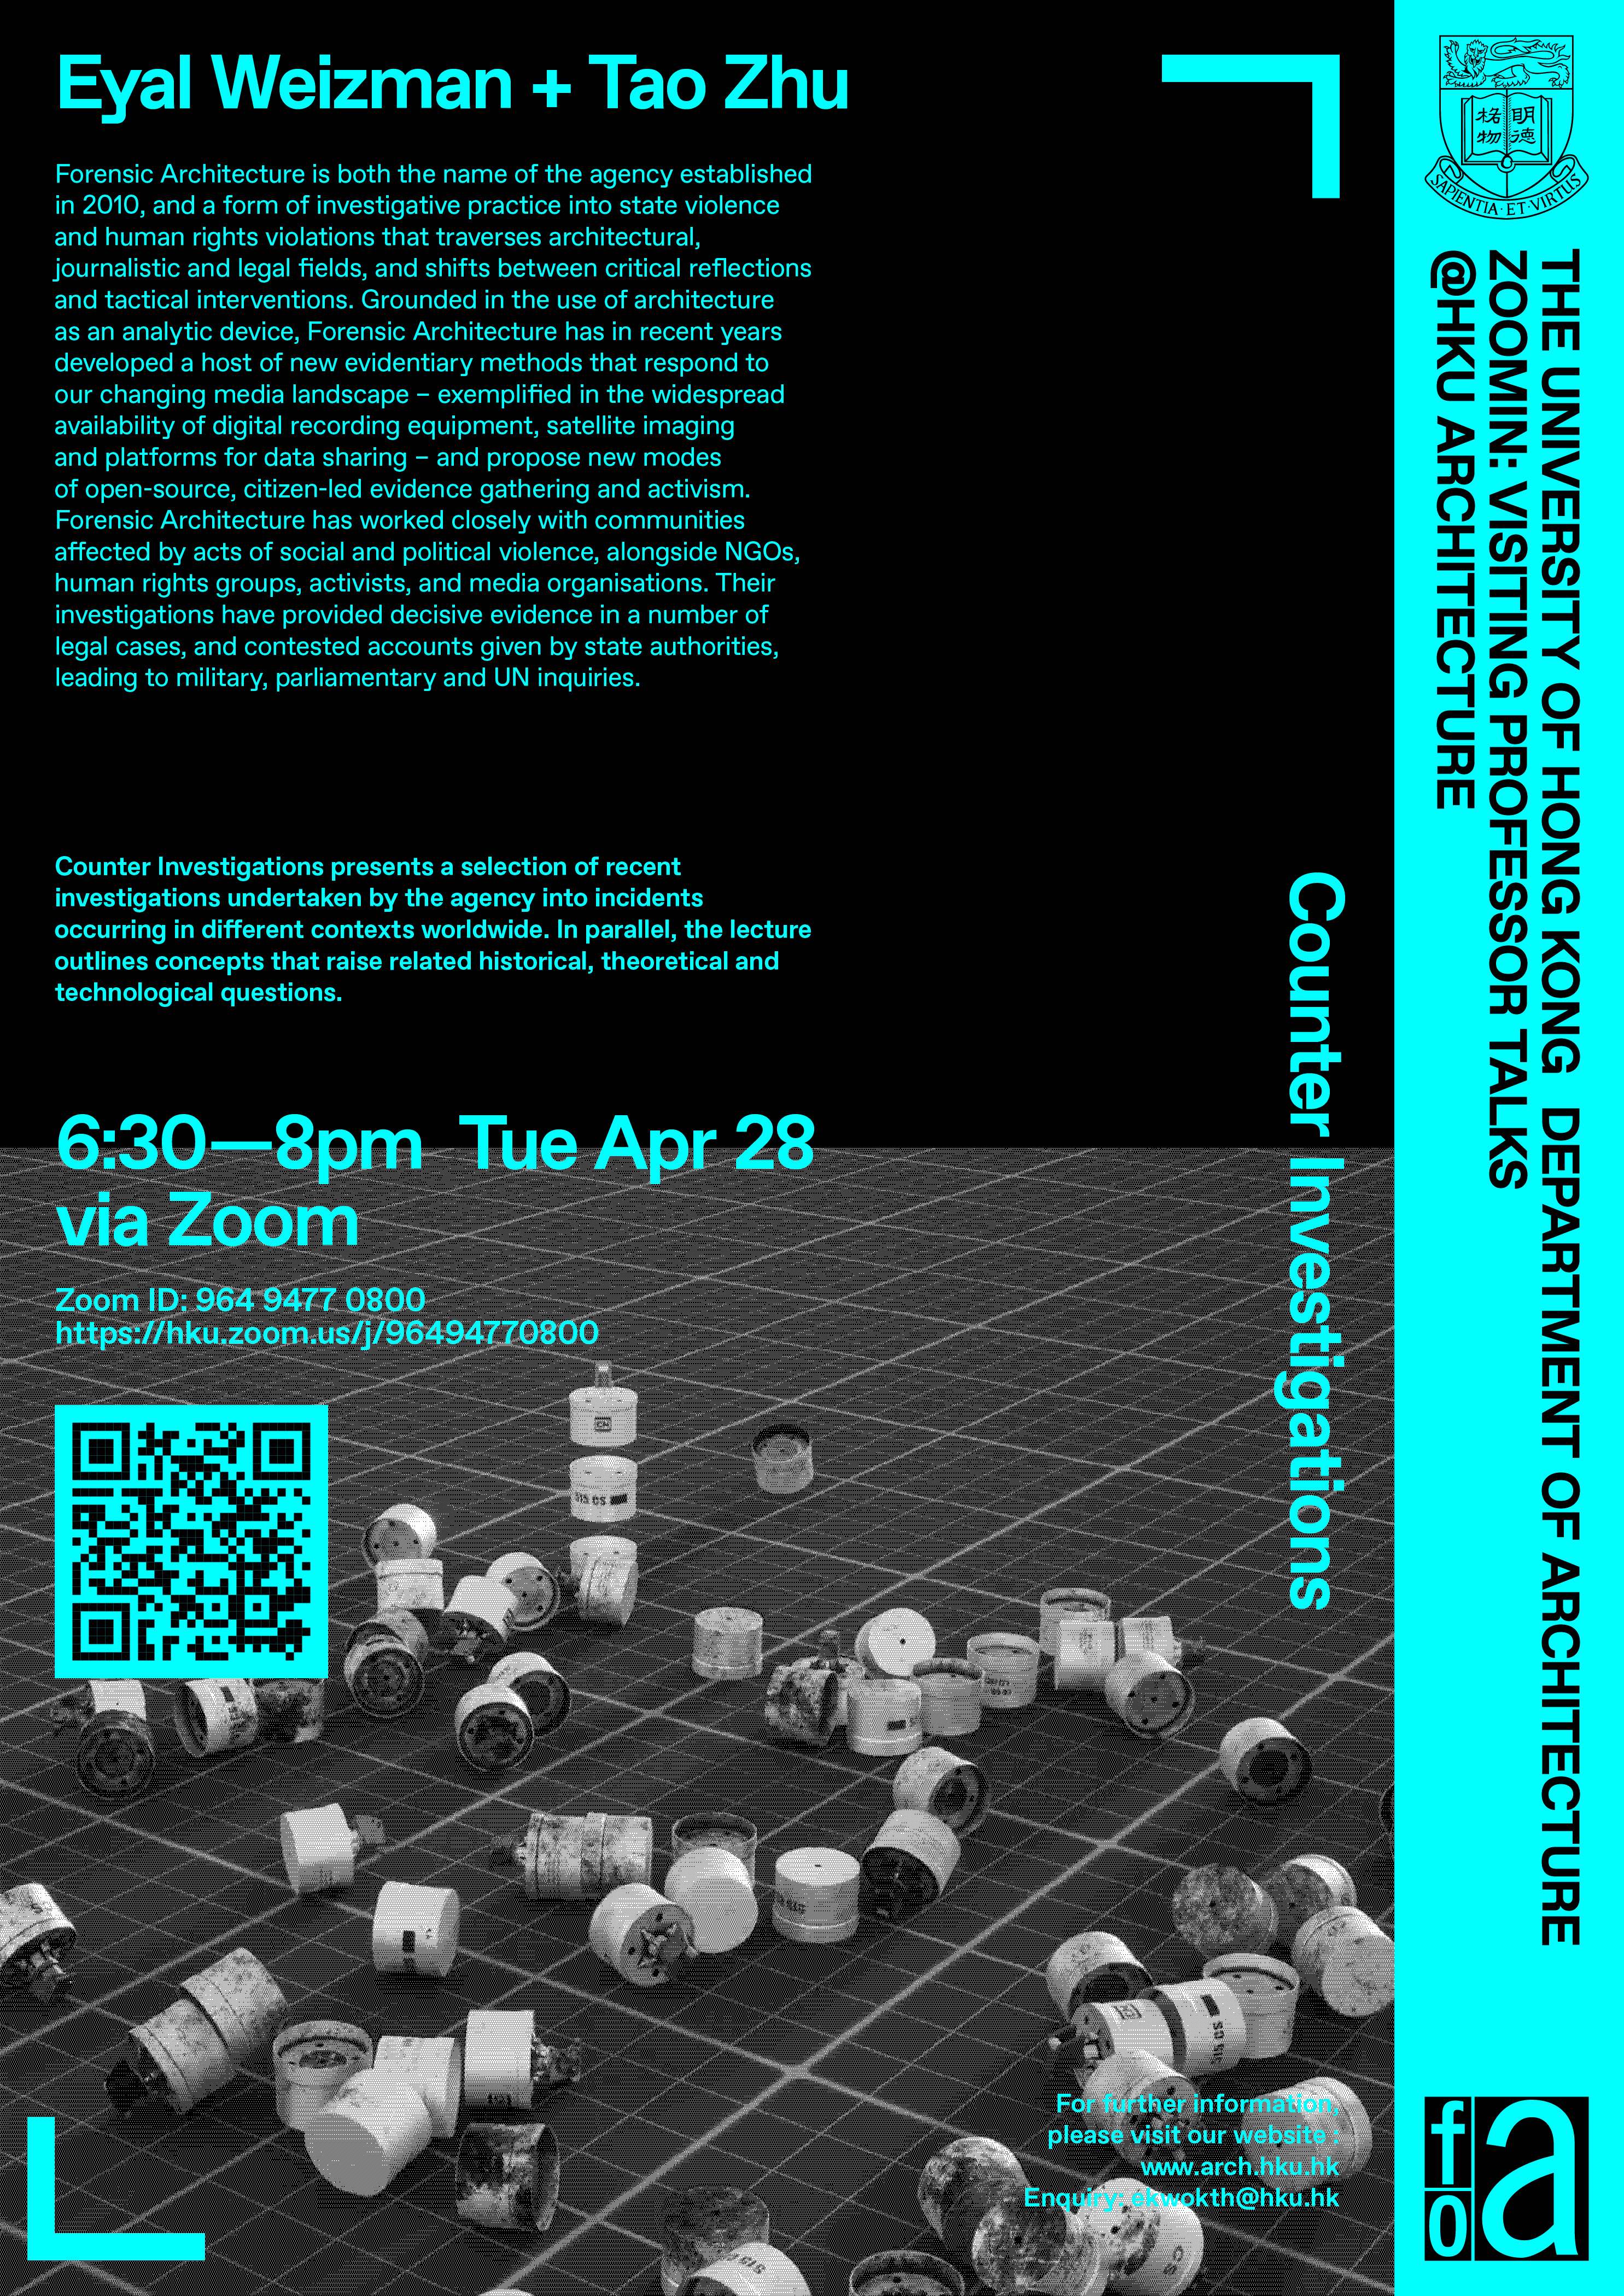 ZOOMIN: Visiting Professor Talks @ HKU Architecture - by Eyal Weizman and Tao Zhu